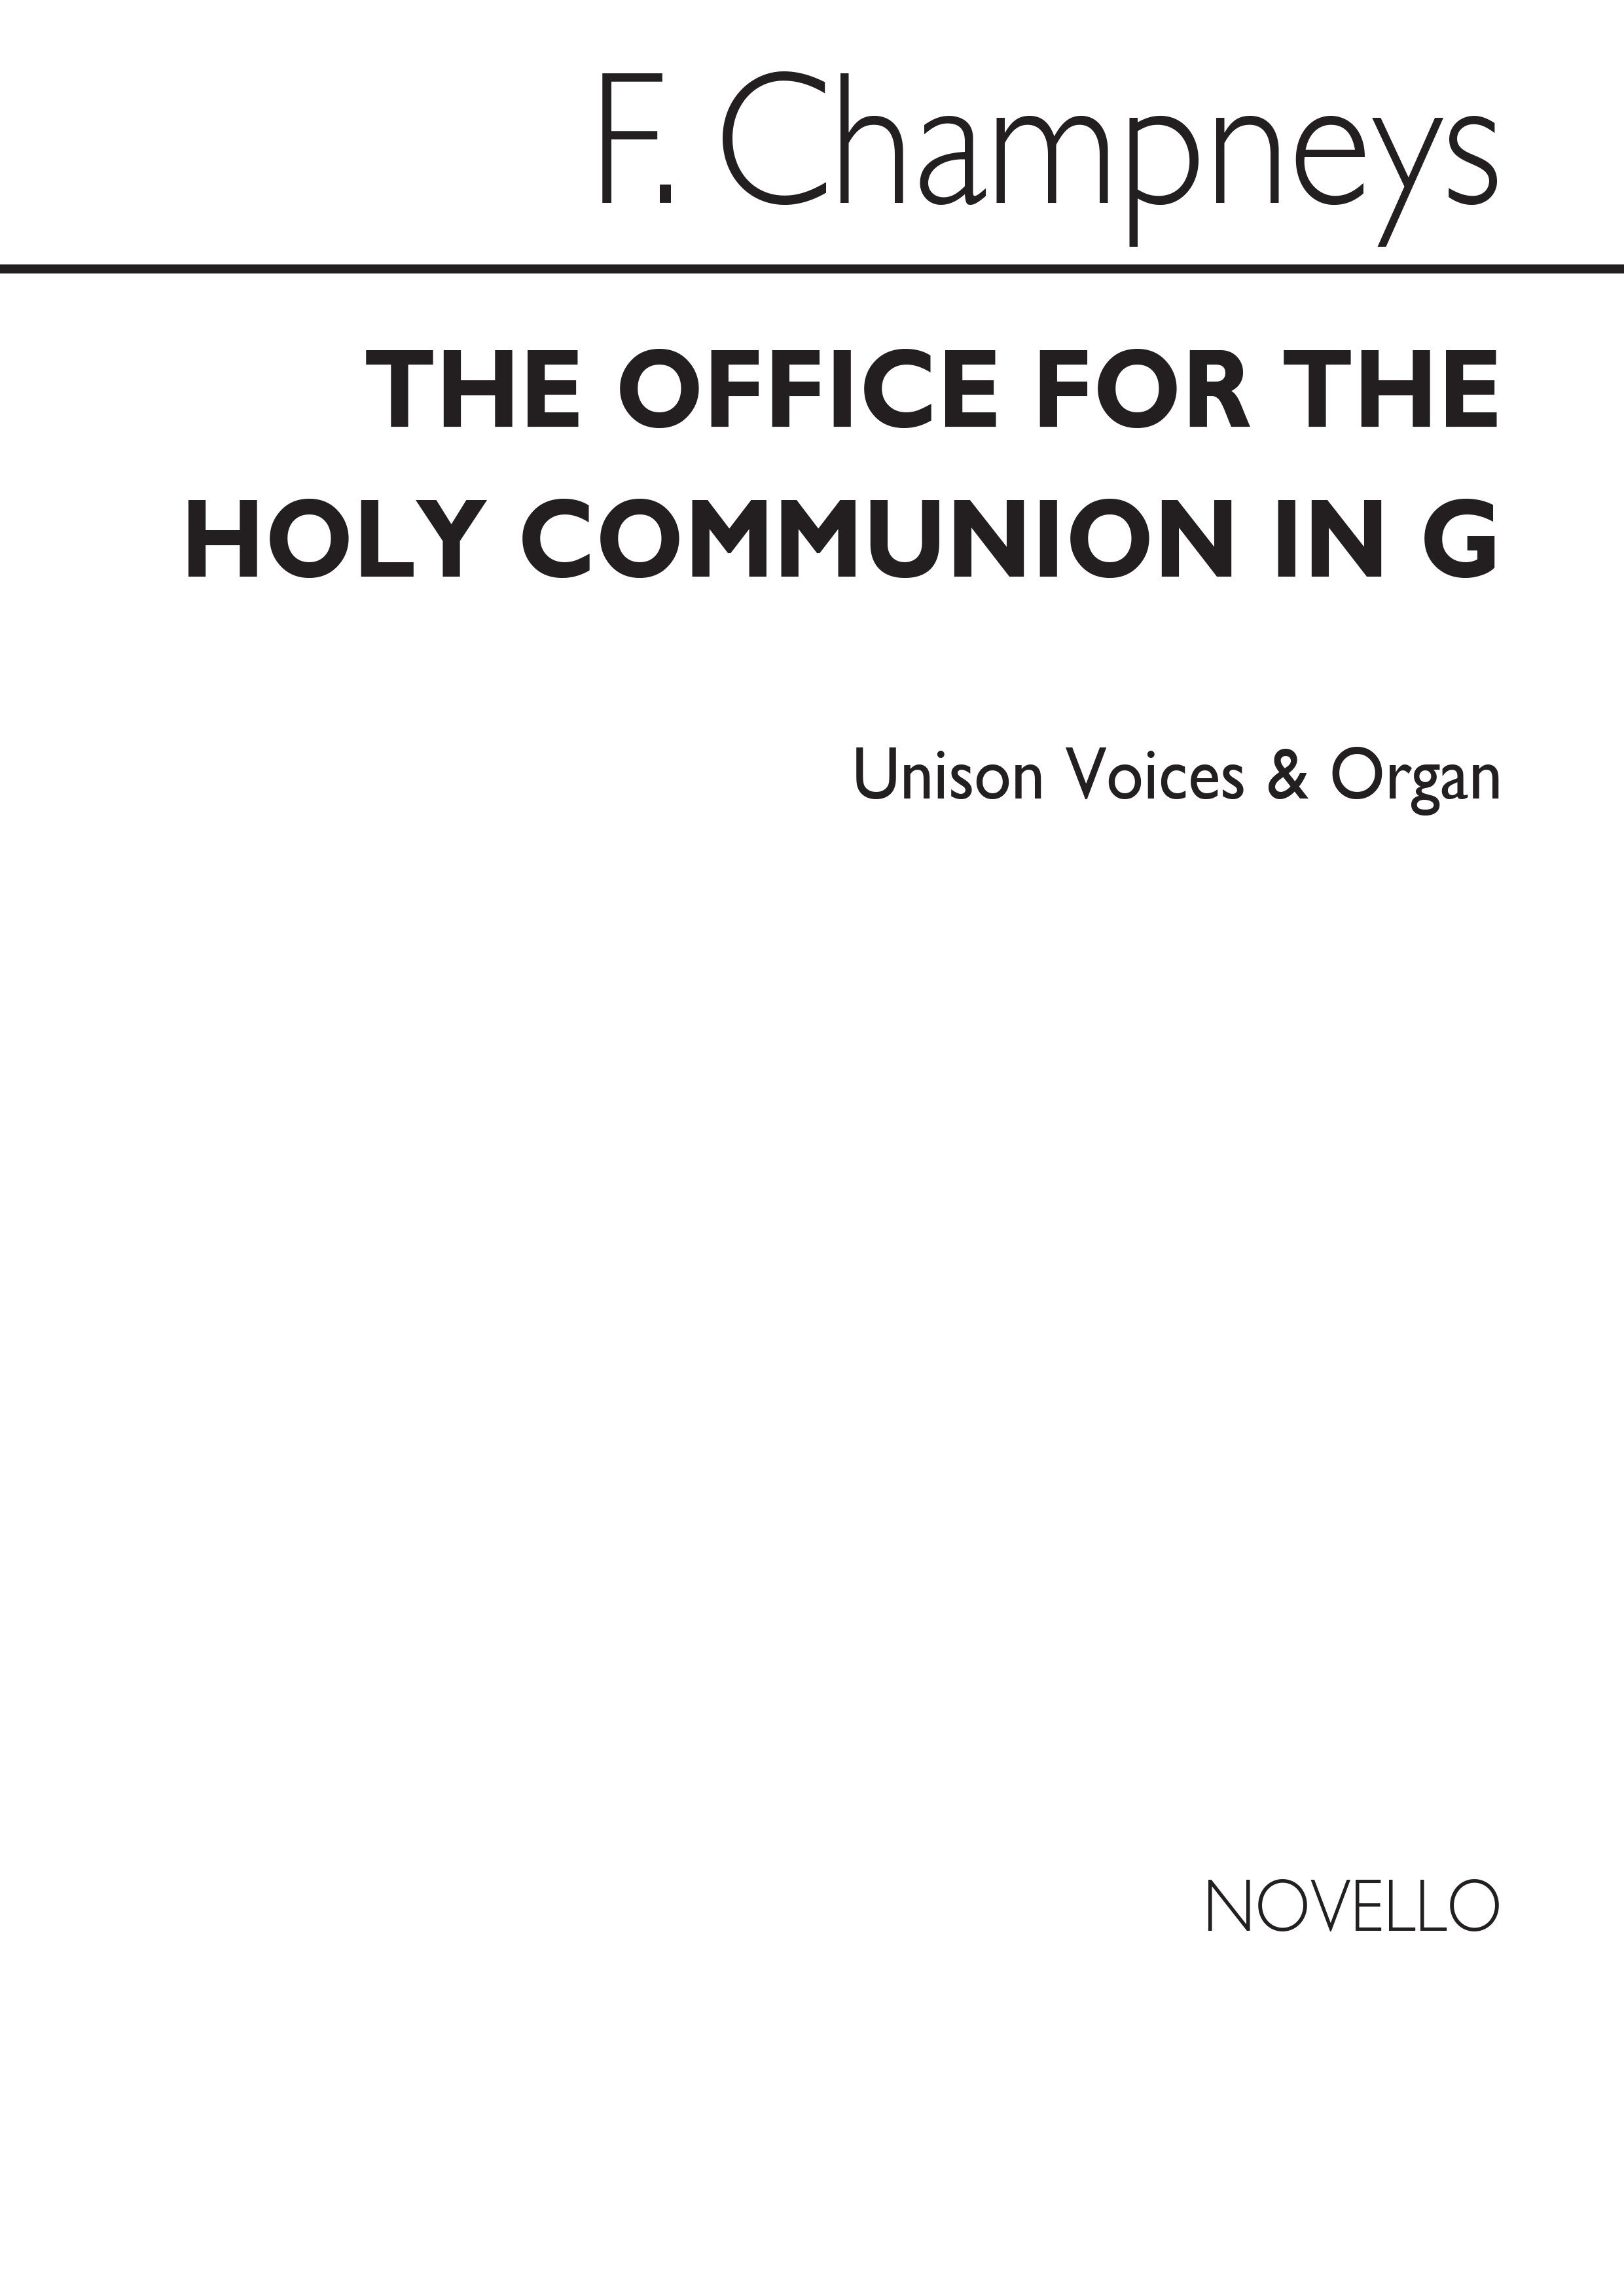 F. Champneys: The Office For The Holy Communion In G Unison/Organ